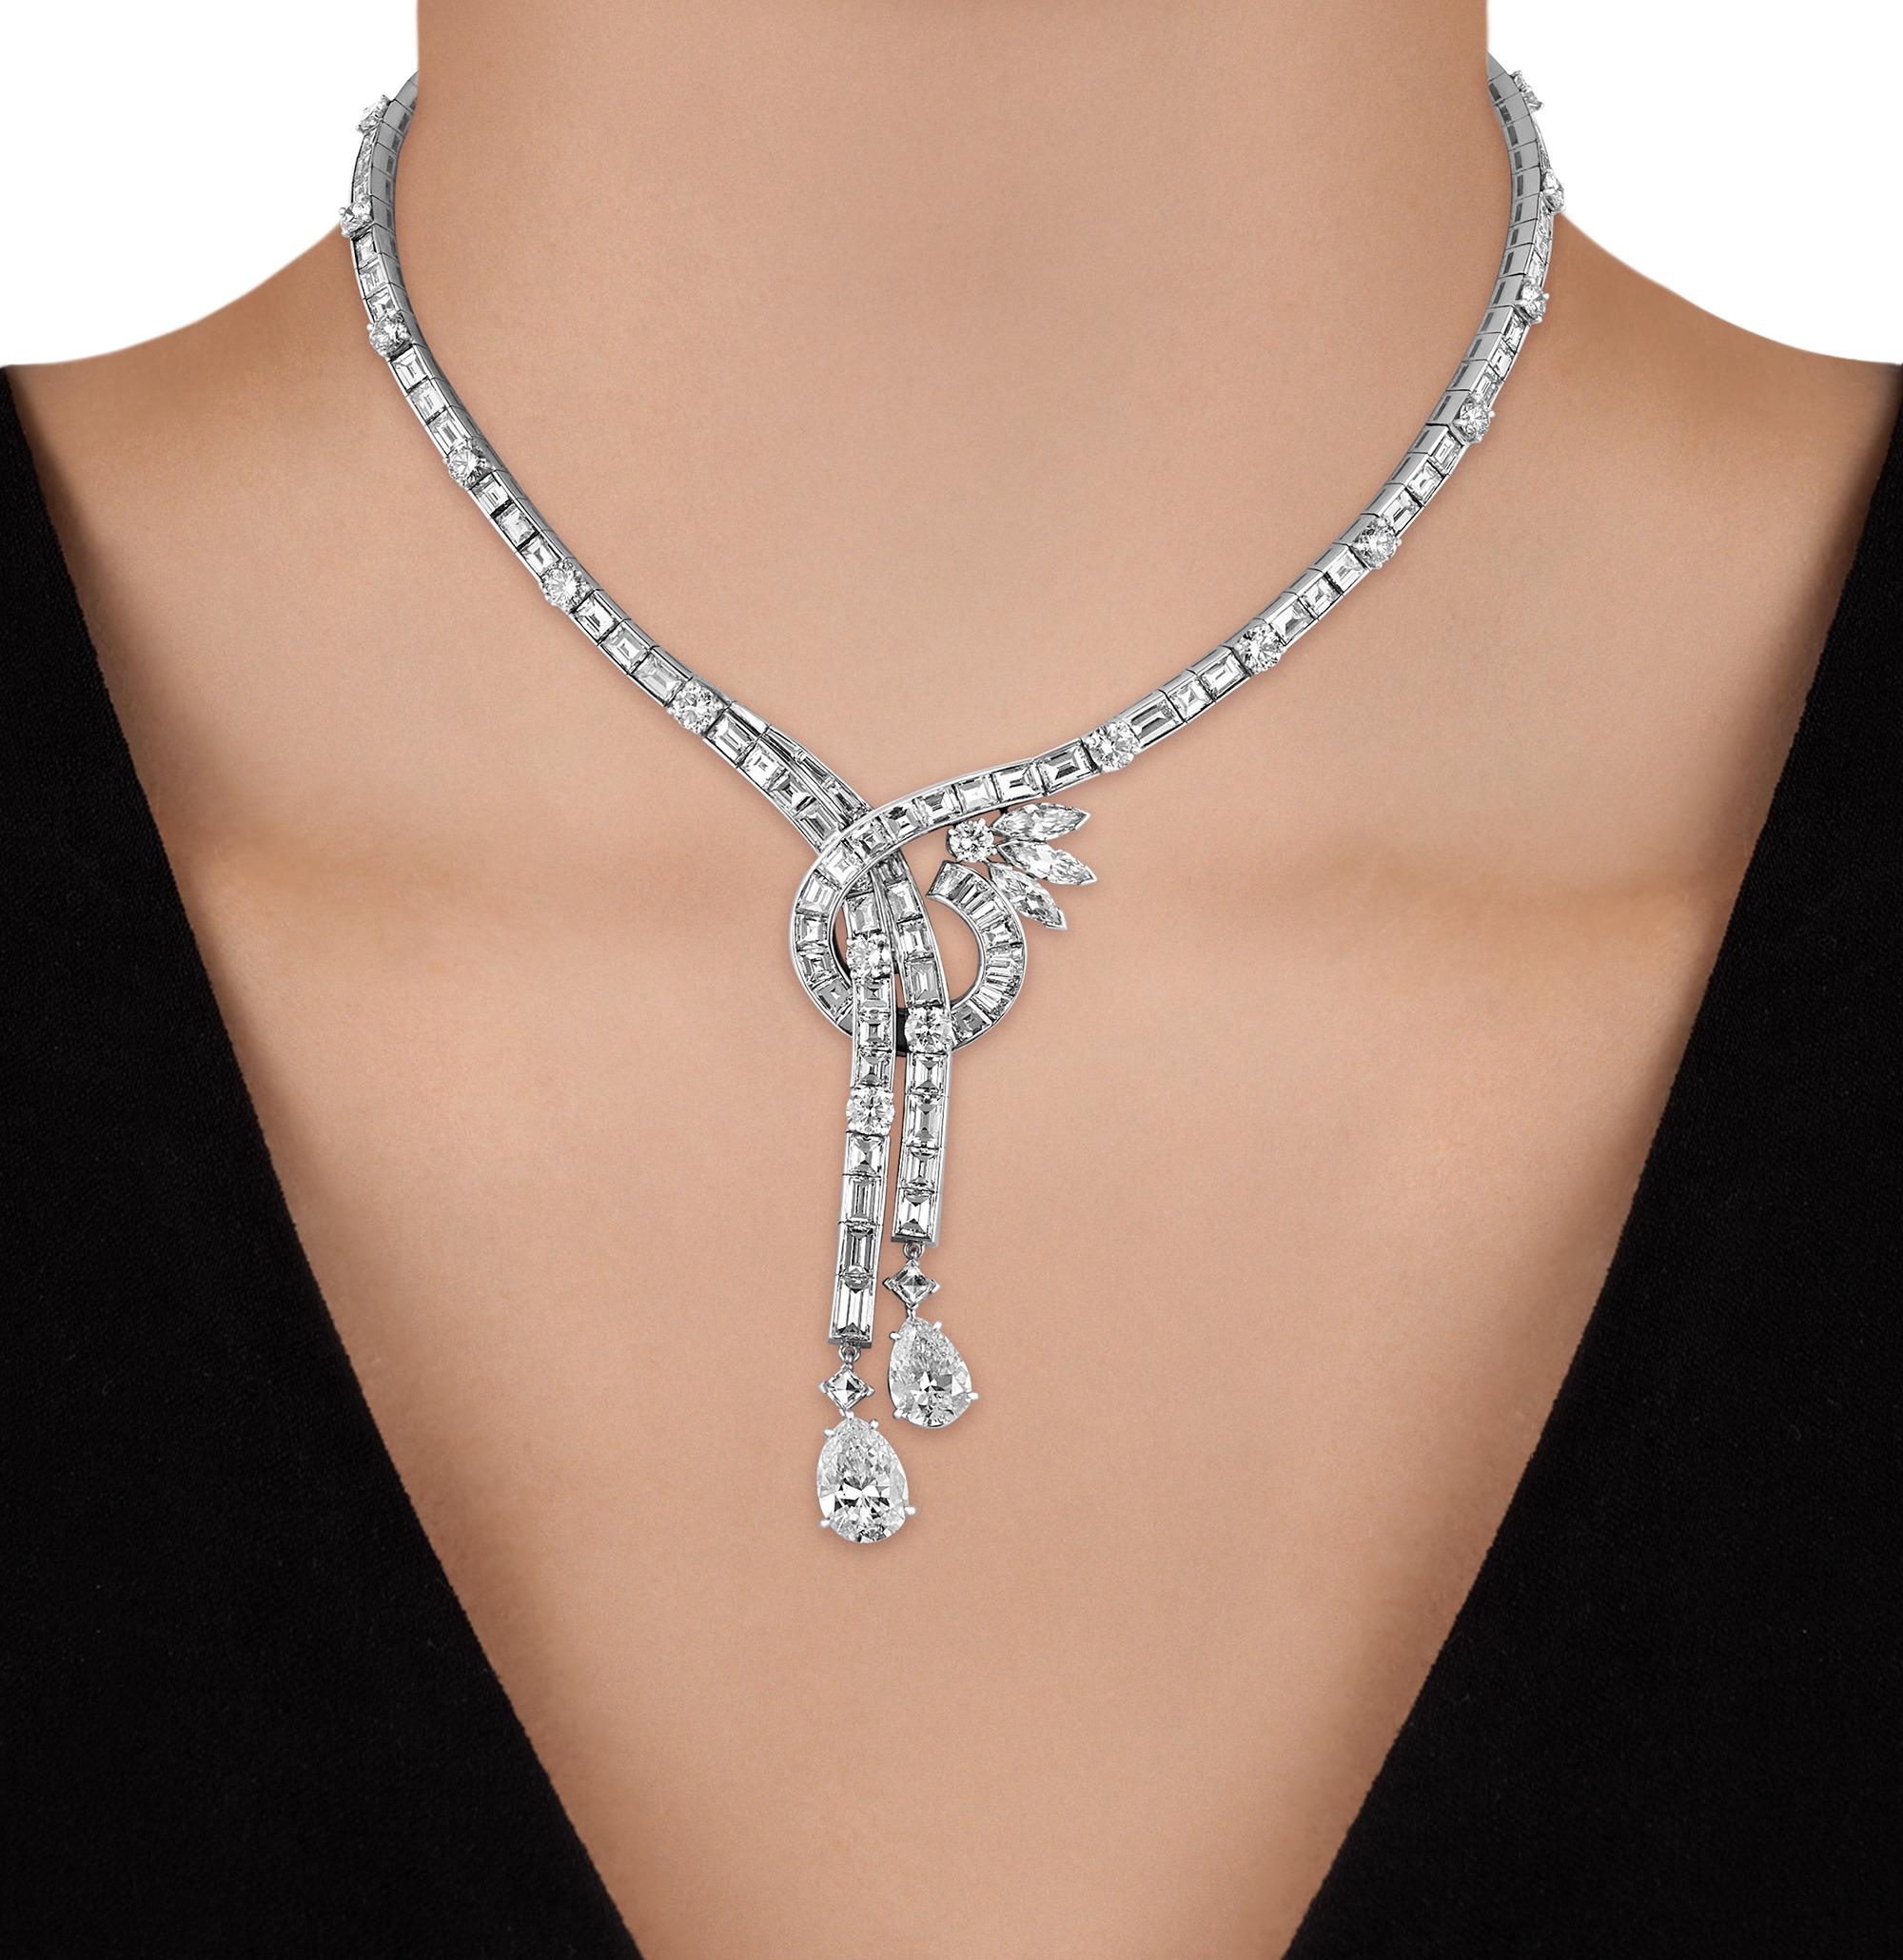 This stunning lariat-style necklace exudes romantic elegance, sparkling with an astounding 36.77 carats of white diamonds. The delicate curve of the necklace is studded with a beautiful array of mixed cut accent diamonds, culminating in two